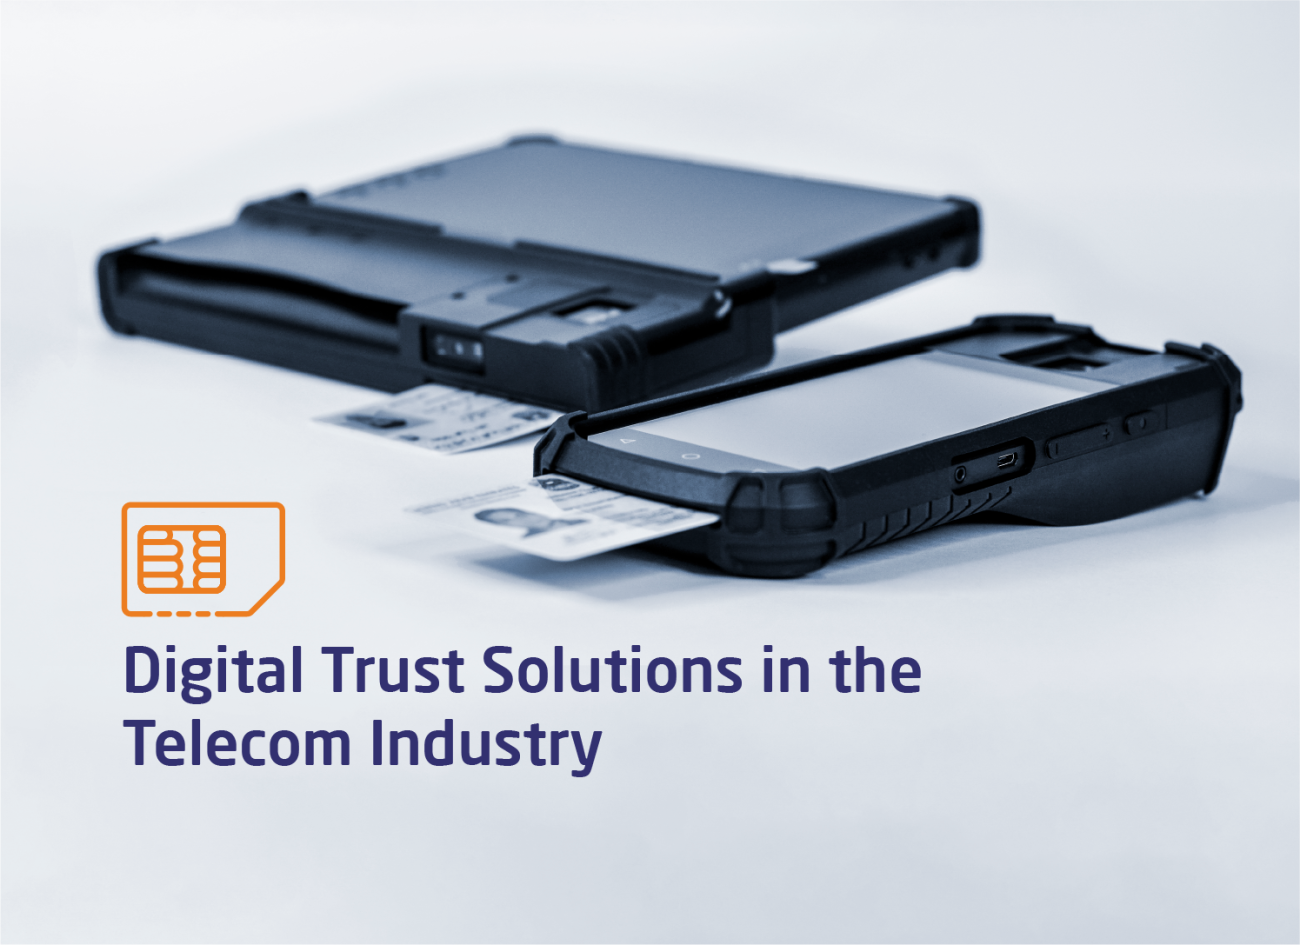 Digital Trust Solutions in the Telecom Industry